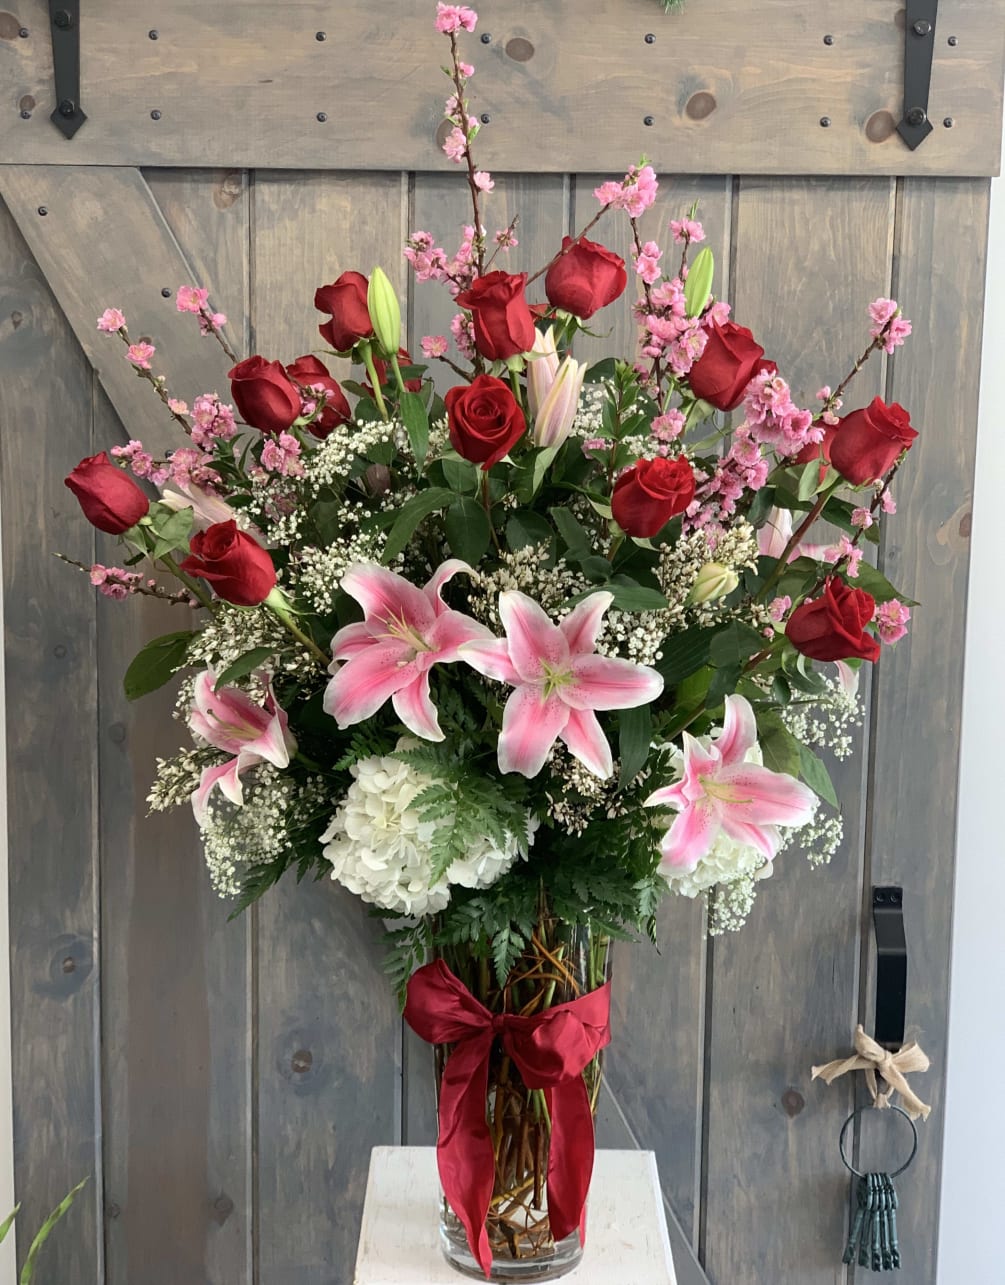 This is by far our best seller and blows a dozen roses